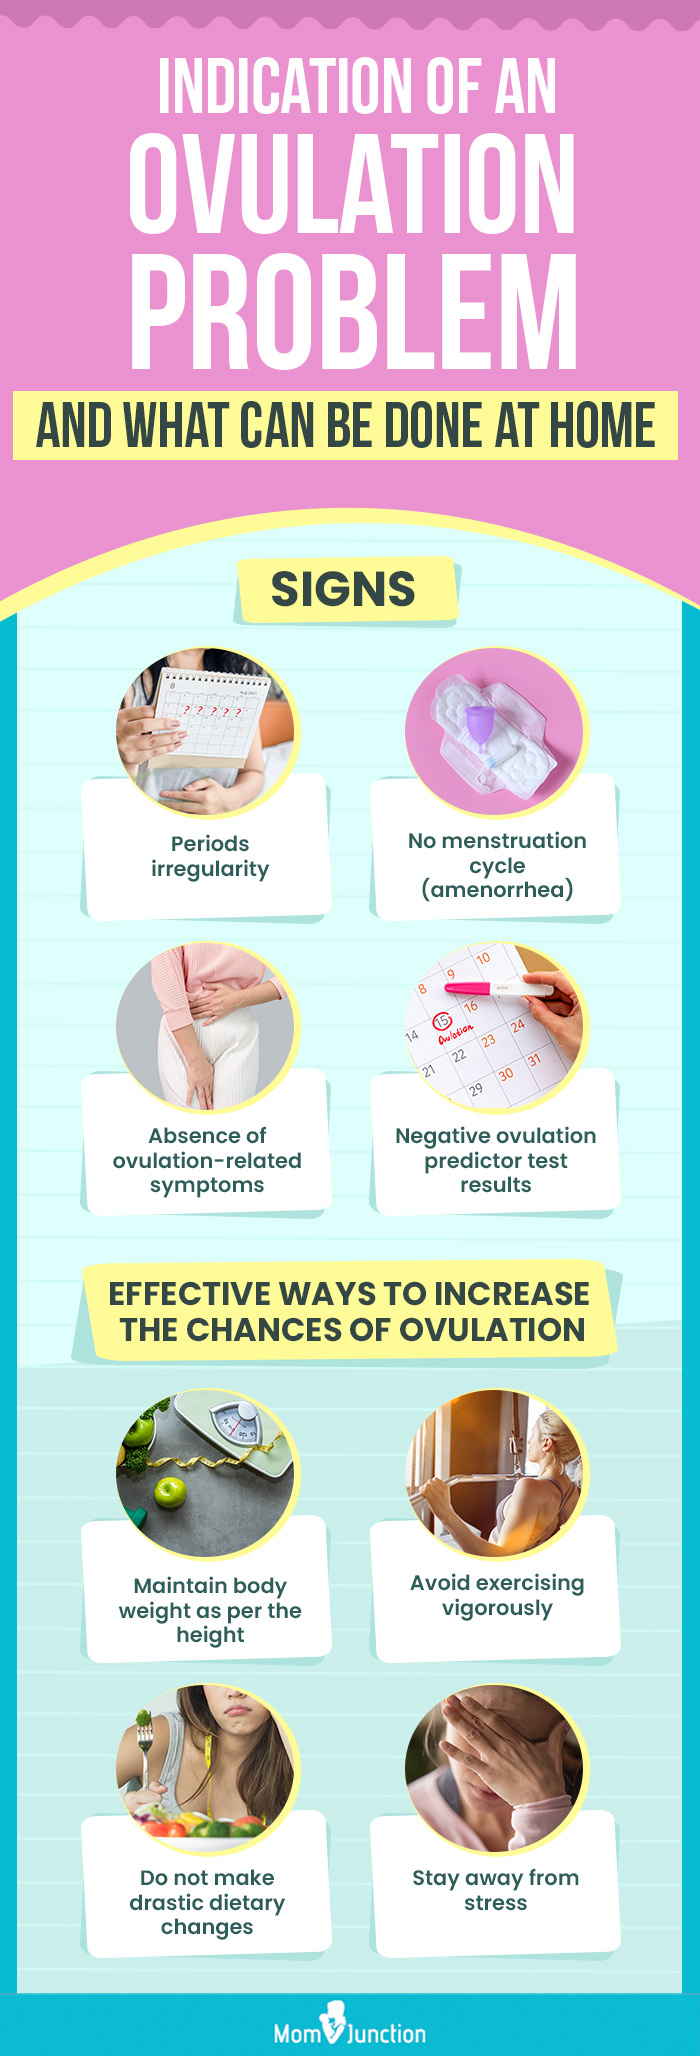 indication of an ovulation problem and what can be done at home (infographic)